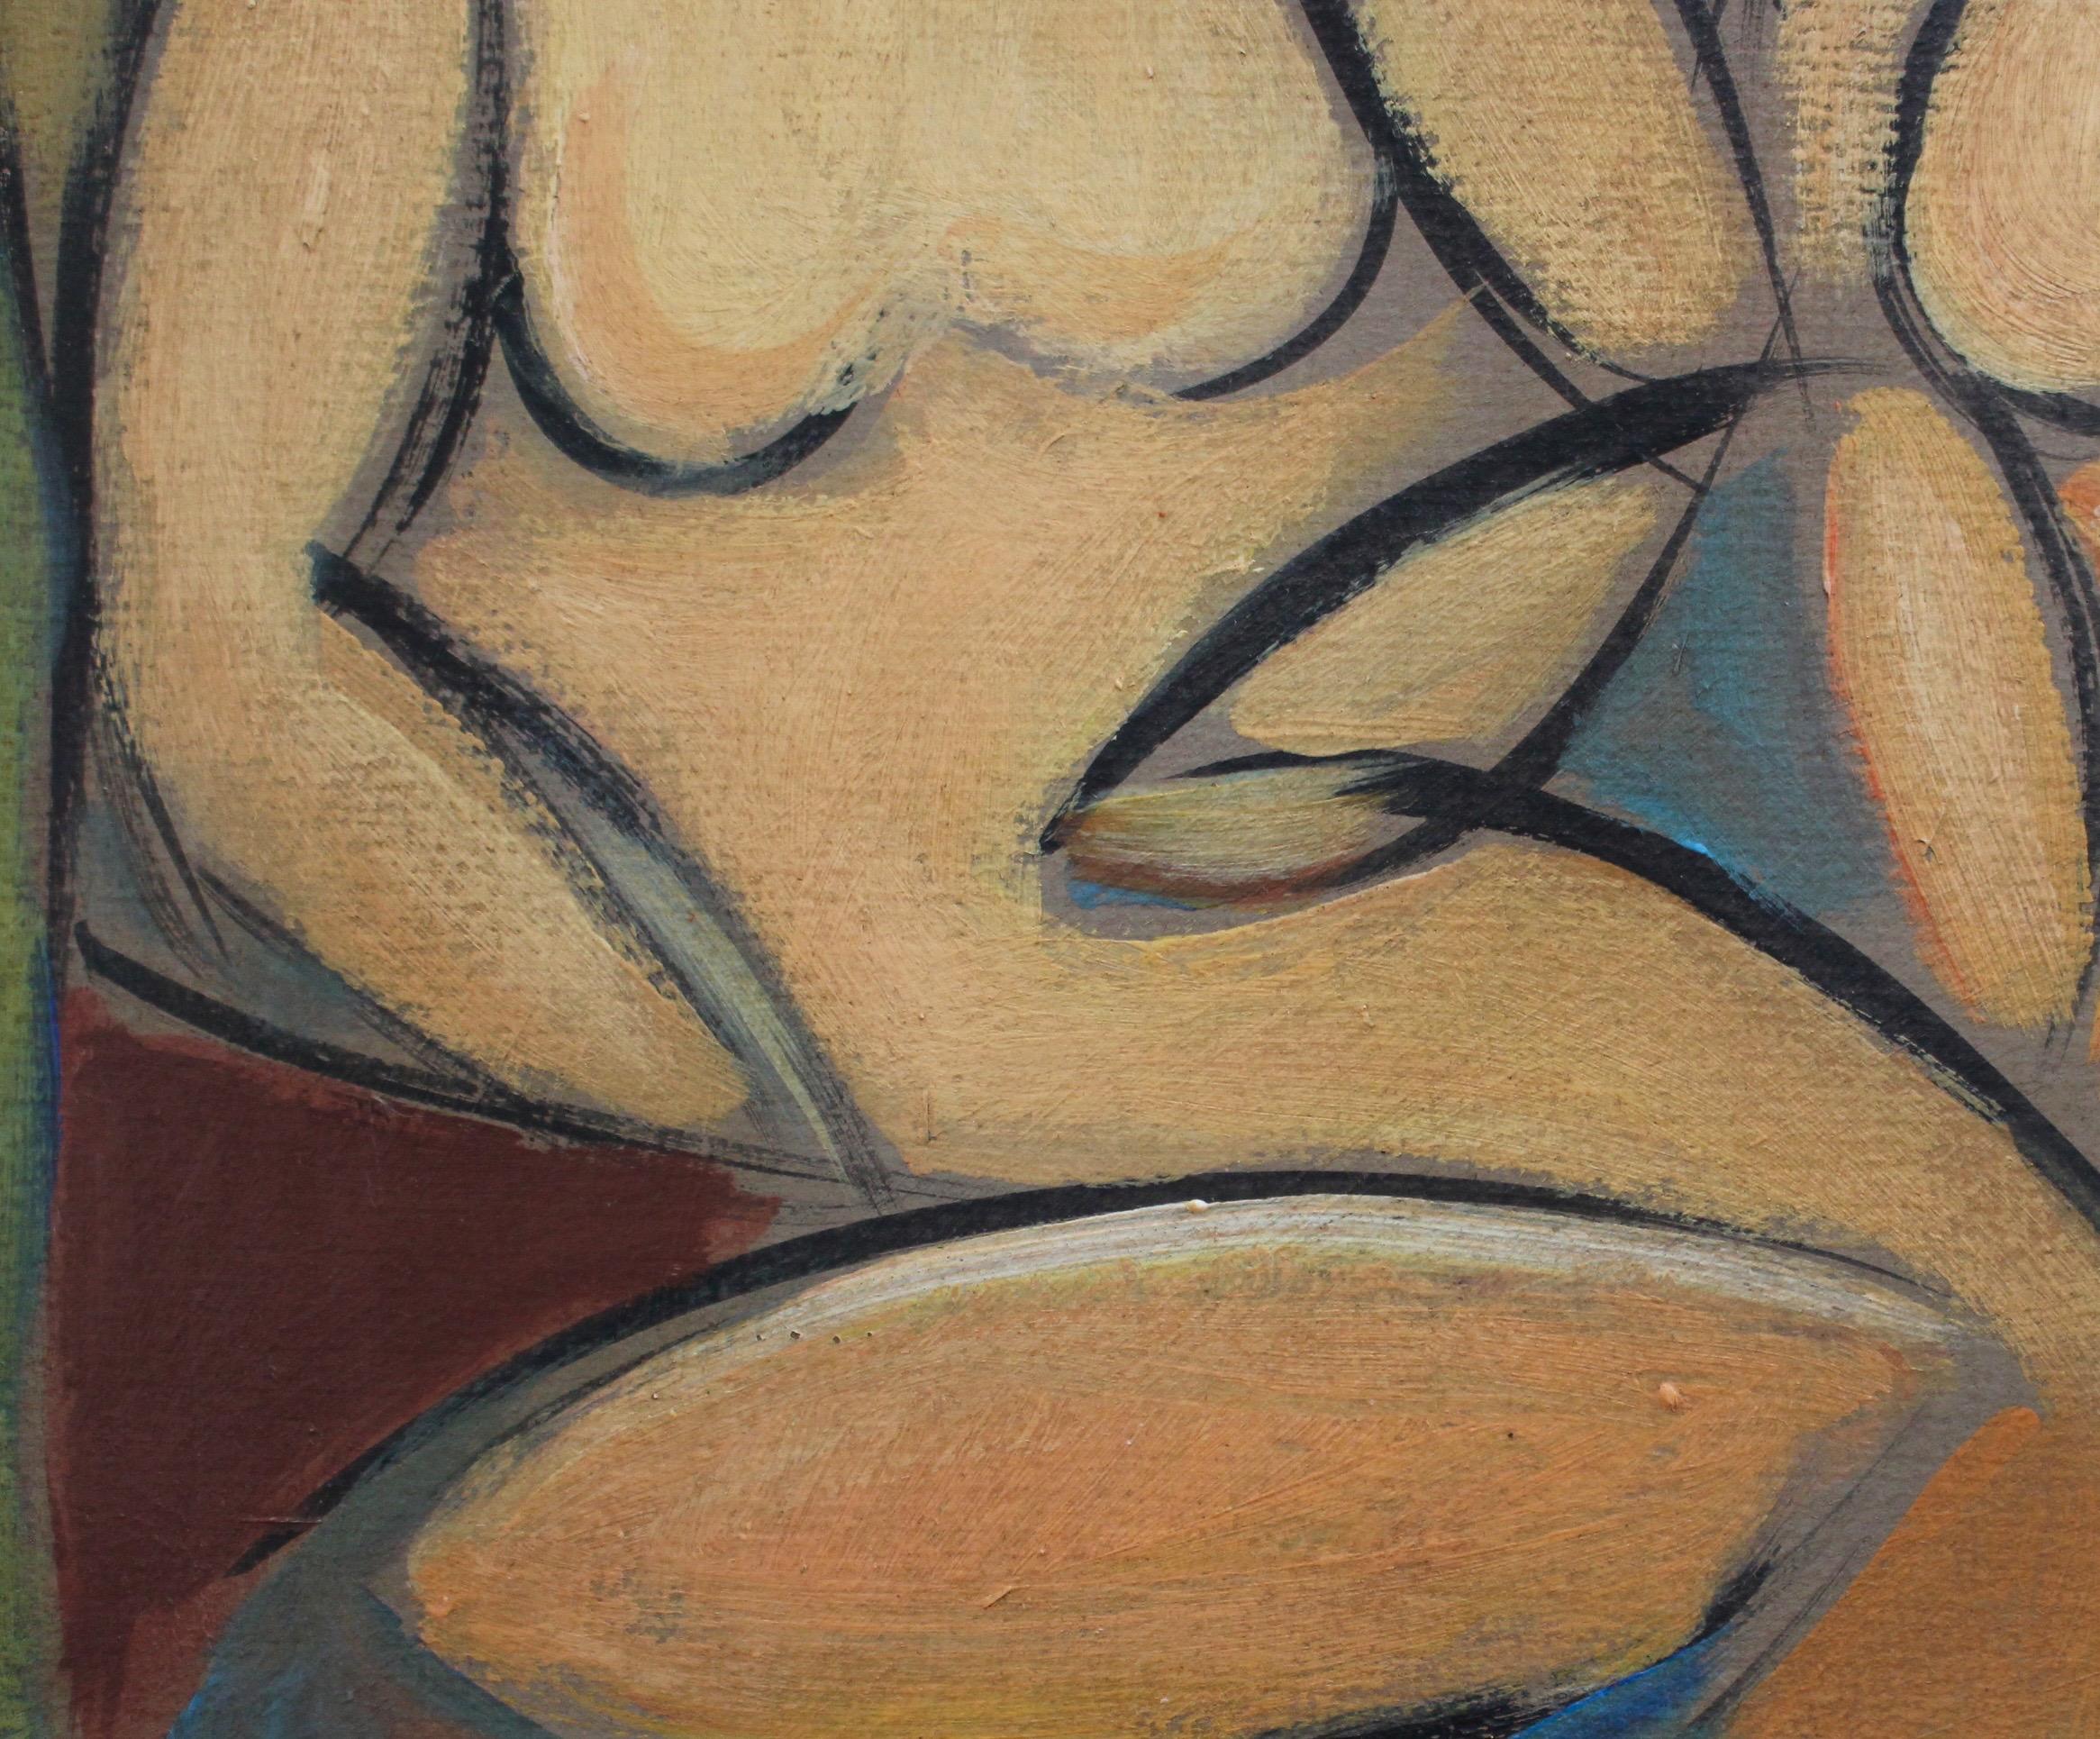 'Two Nudes in Landscape' by STM, Modern Cubist Portrait Oil Painting, Berlin 6